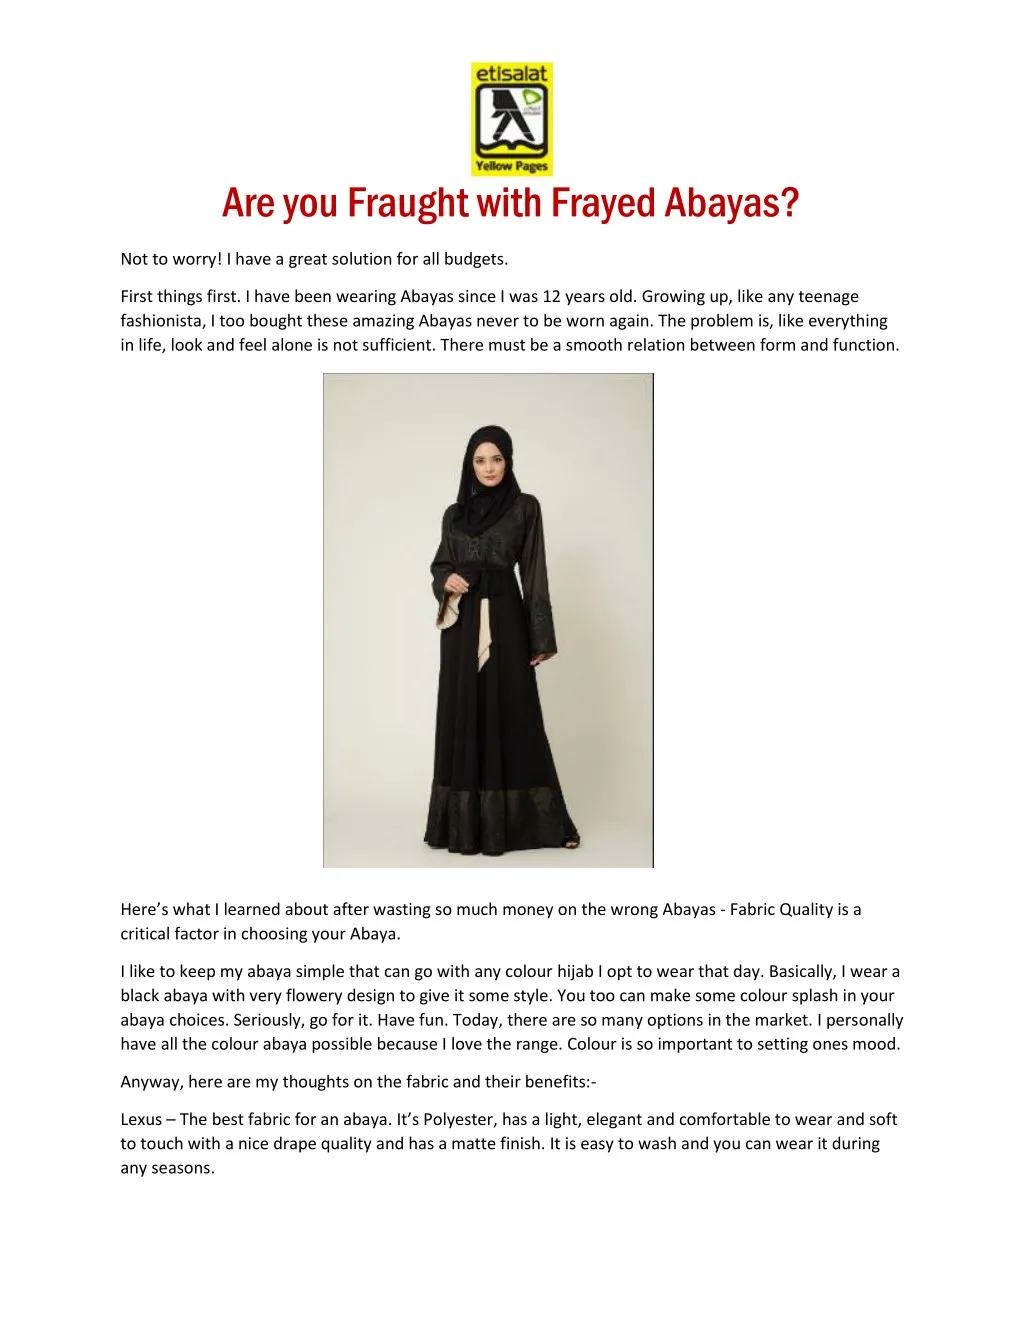 are you fraught with frayed abayas